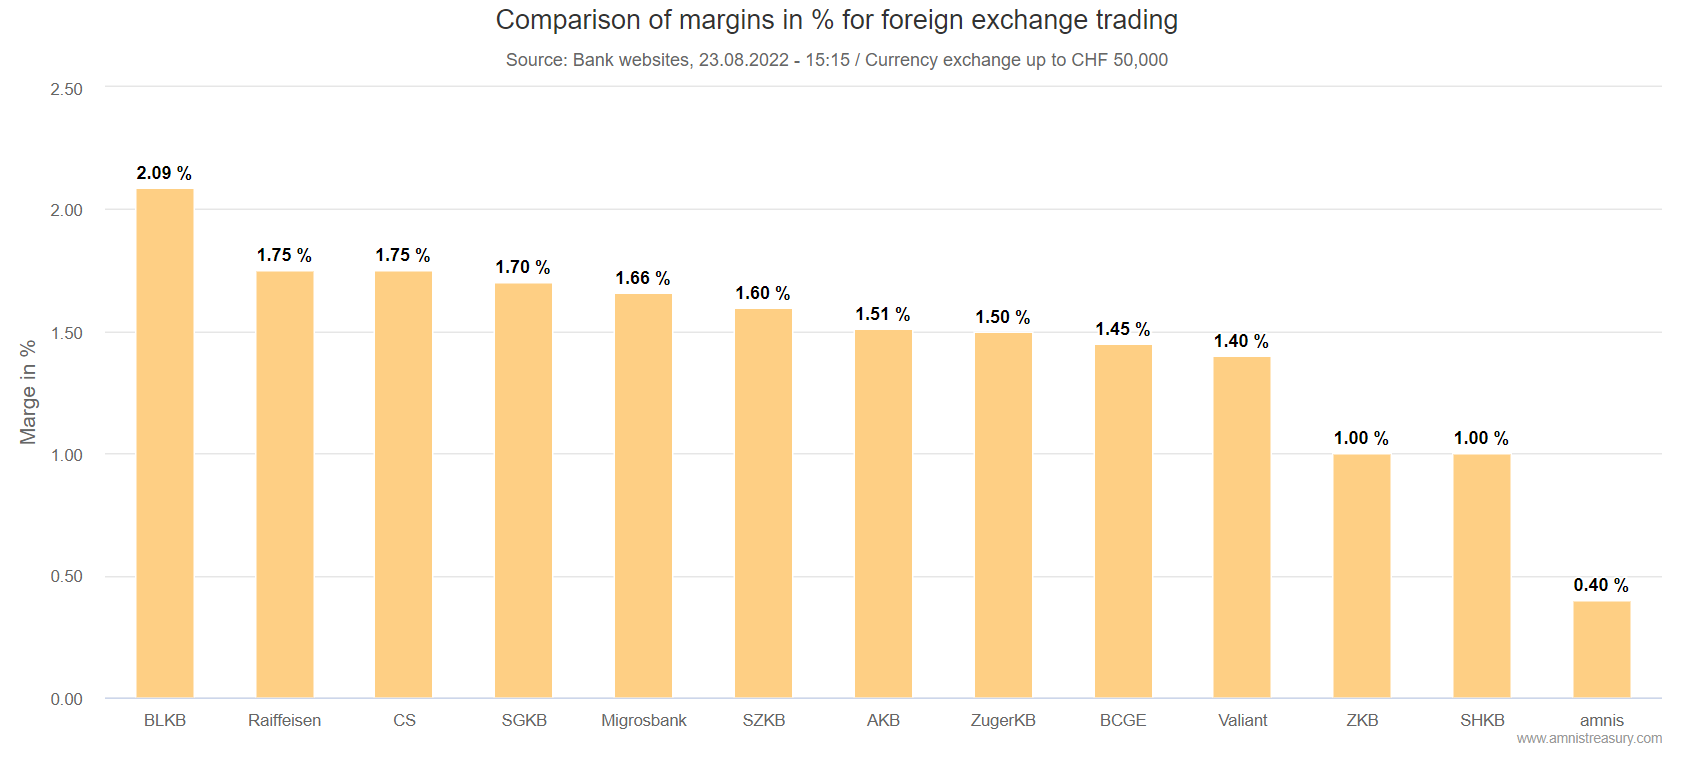 Swiss Banks Margin Comparison in Foreign Exchange Trading (08/2022)